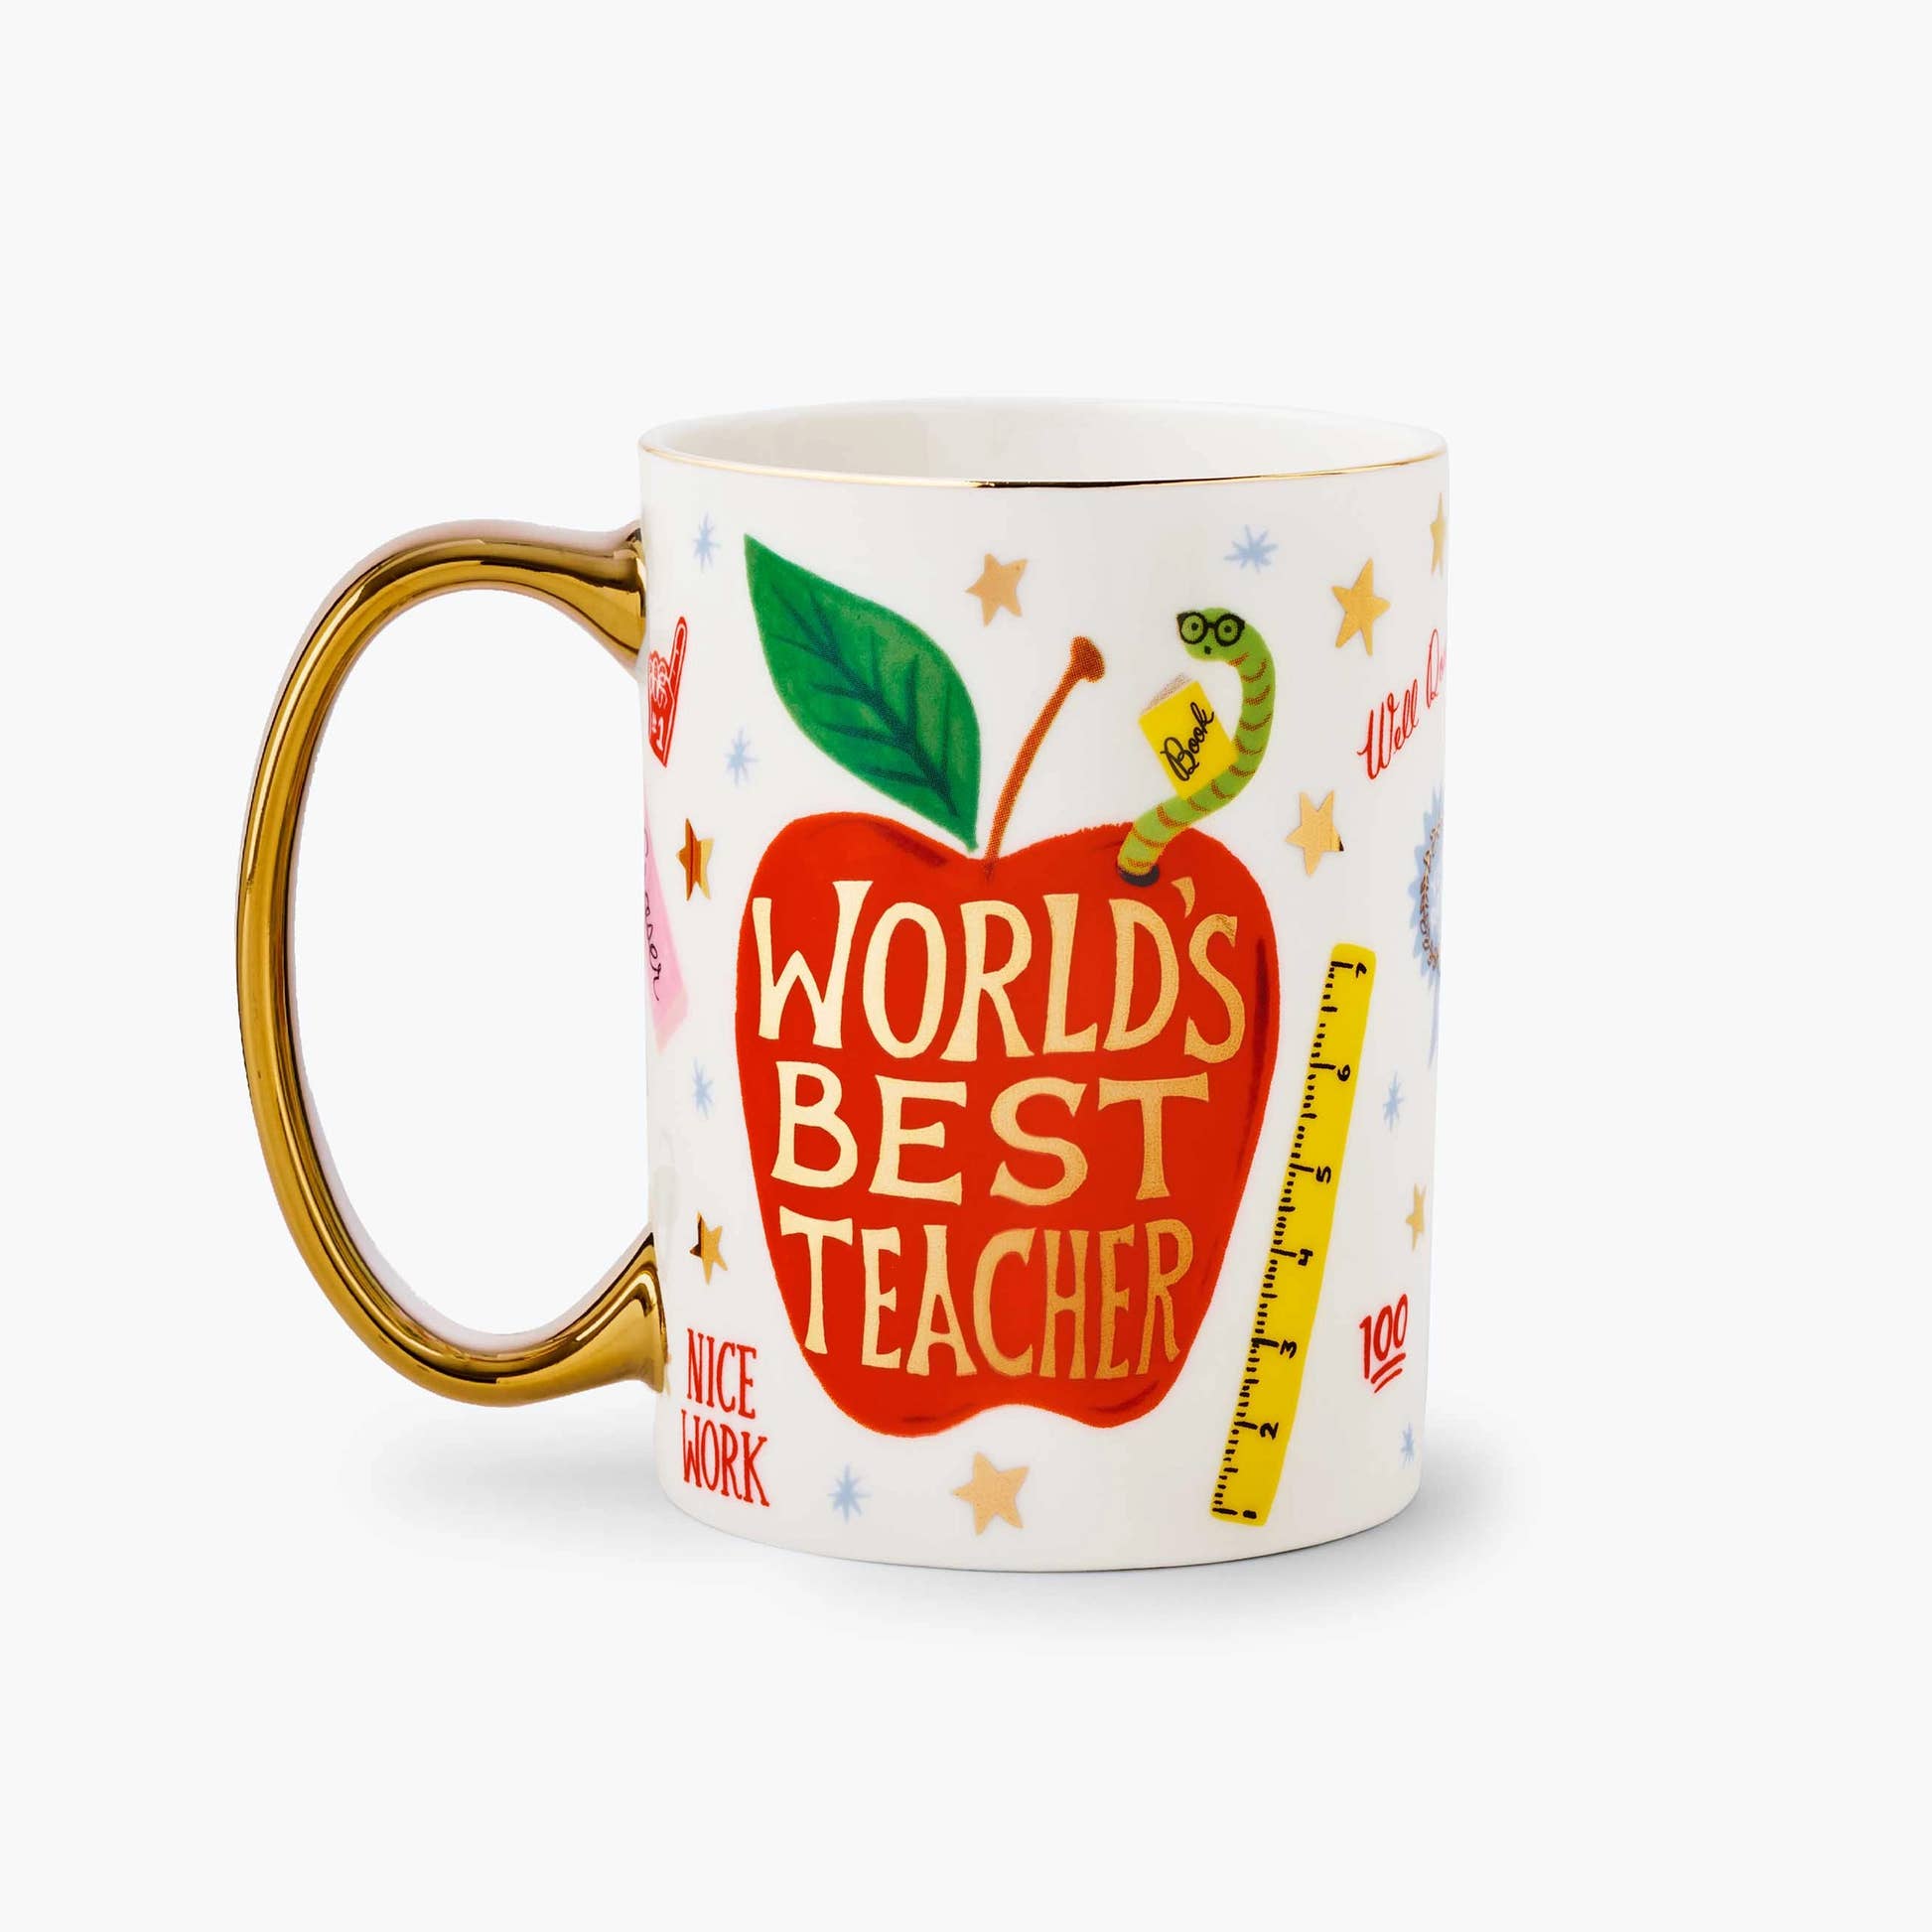 World's Best Teacher Porcelain Mug illustrated with a big red apple with "World's Best Teacher" inside, with a green worm, stars, stickers, and a ruler